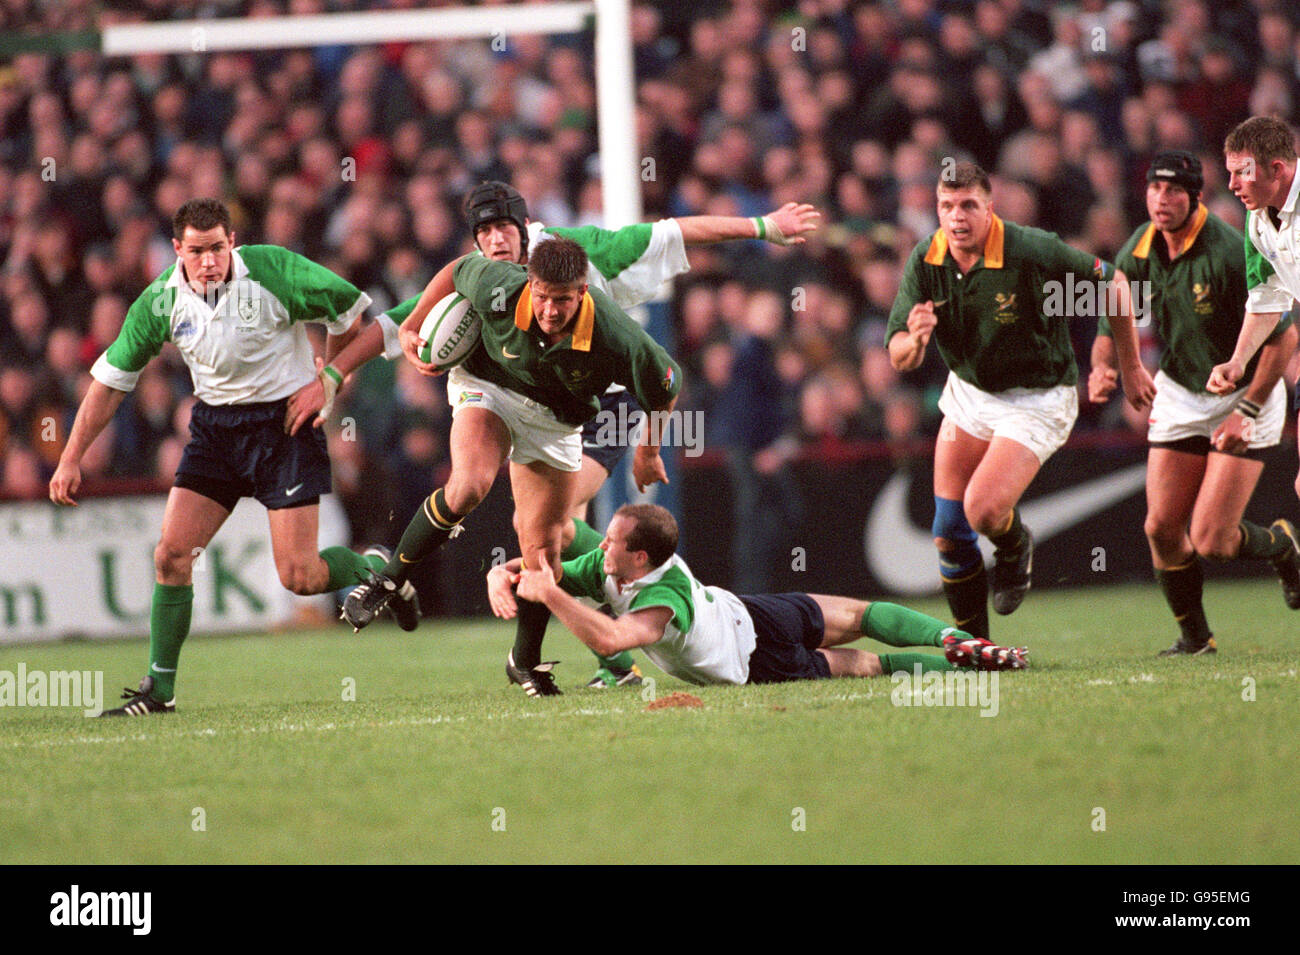 Rugby Union - Test Match - Ireland v South Africa. South Africa's Bobby Skinstad (second left) breaks through an Irish tackle Stock Photo